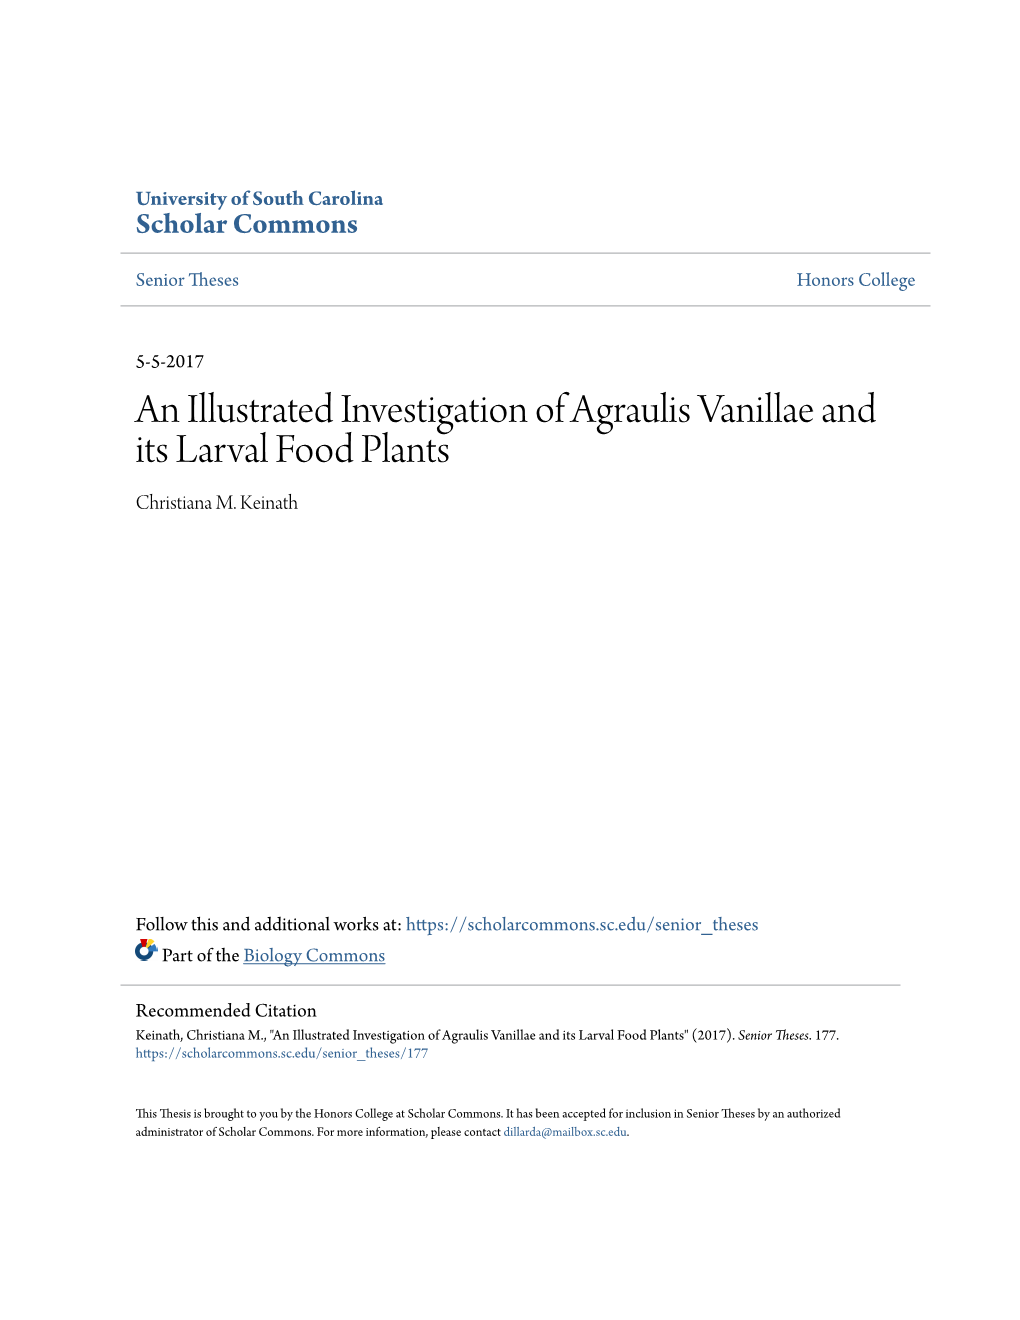 An Illustrated Investigation of Agraulis Vanillae and Its Larval Food Plants Christiana M